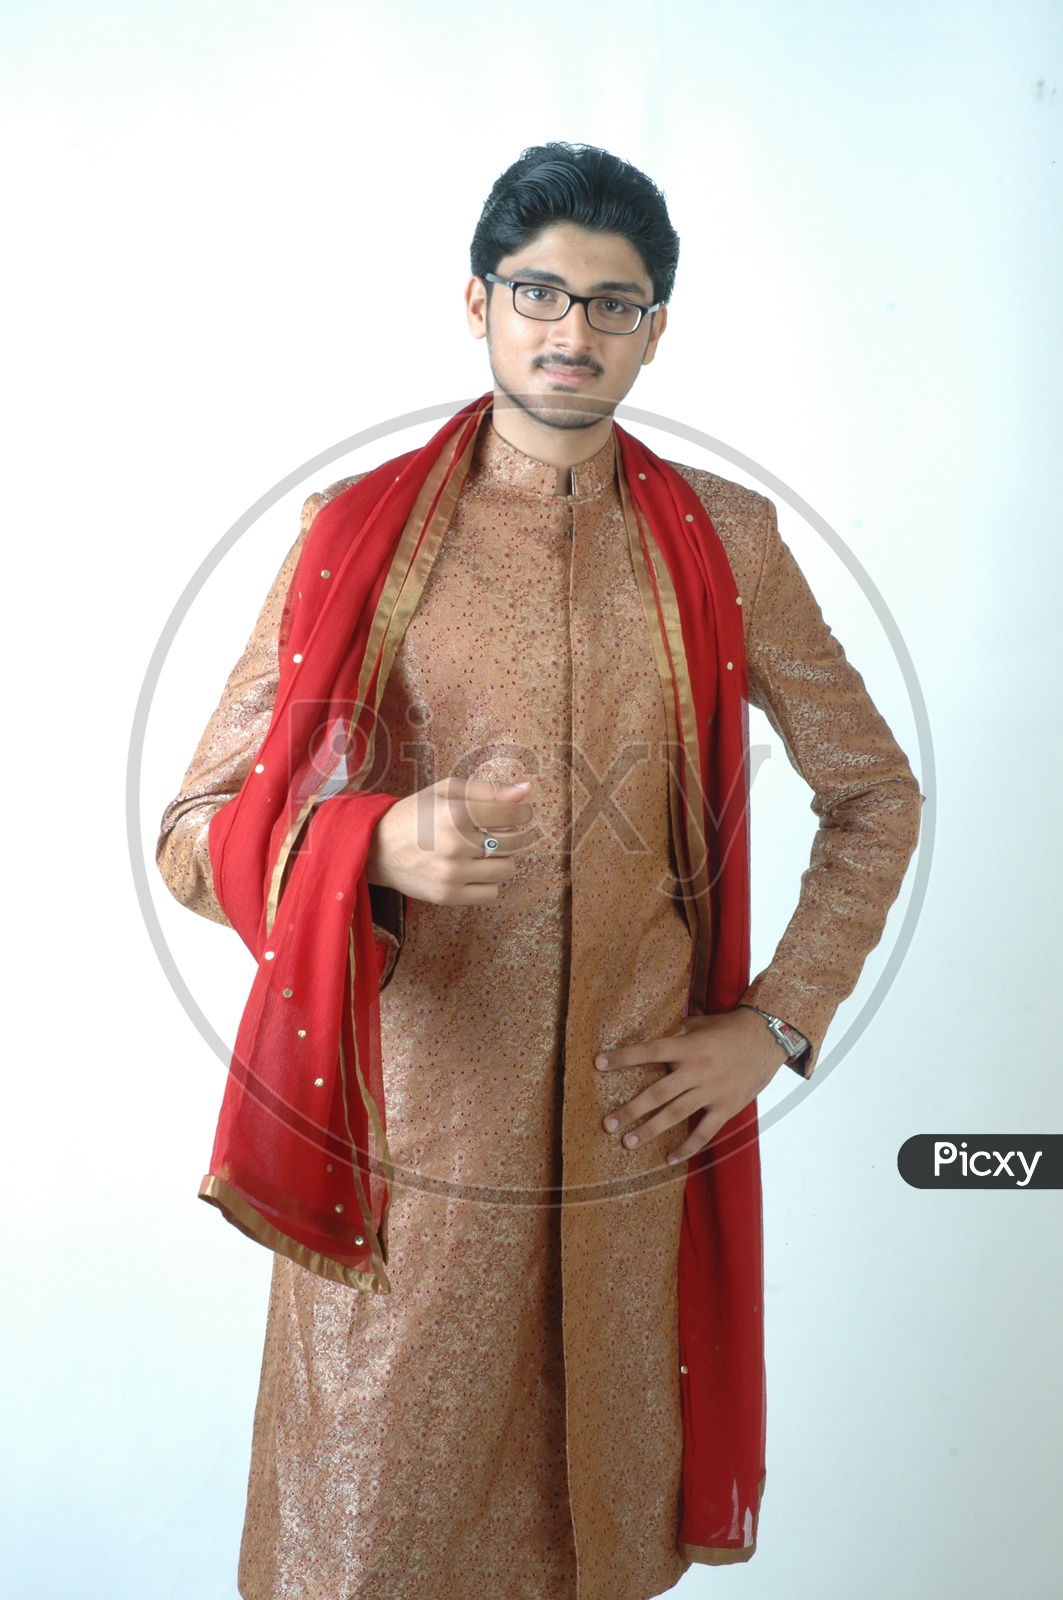 Image of A Young Indian Man In traditional Ethnic Wear or Sherwani and  Posing With a Smile Face On an Isolated White Background-KE599275-Picxy